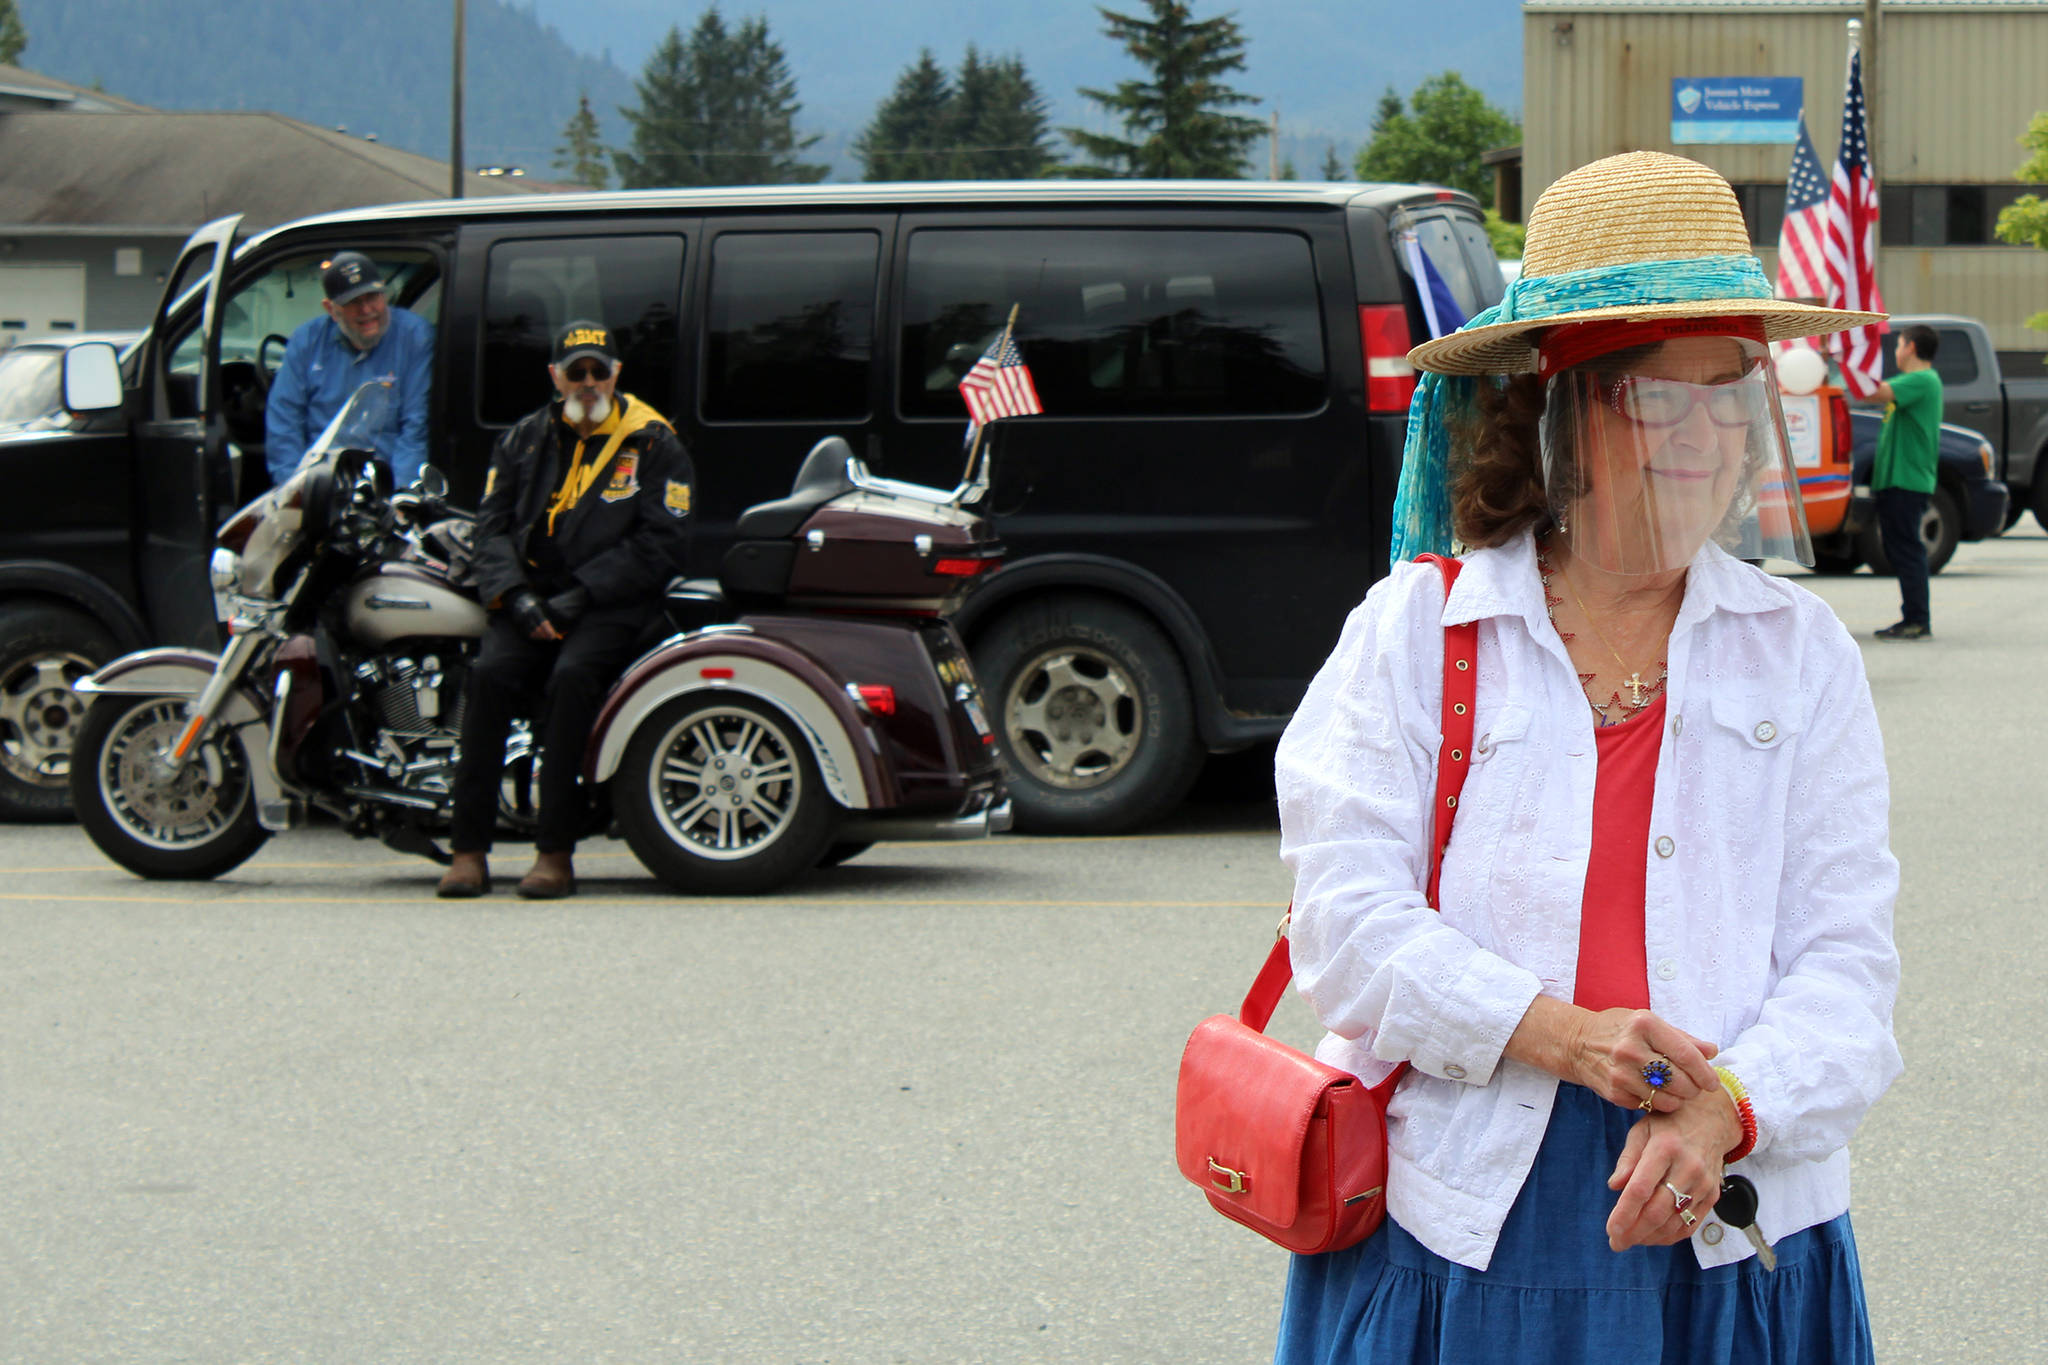 Suzanne Haight dons a hat and face covering in the parade staging area prior to a parade Saturday, July 4, 2020. (Ben Hohenstatt | Juneau Empire)